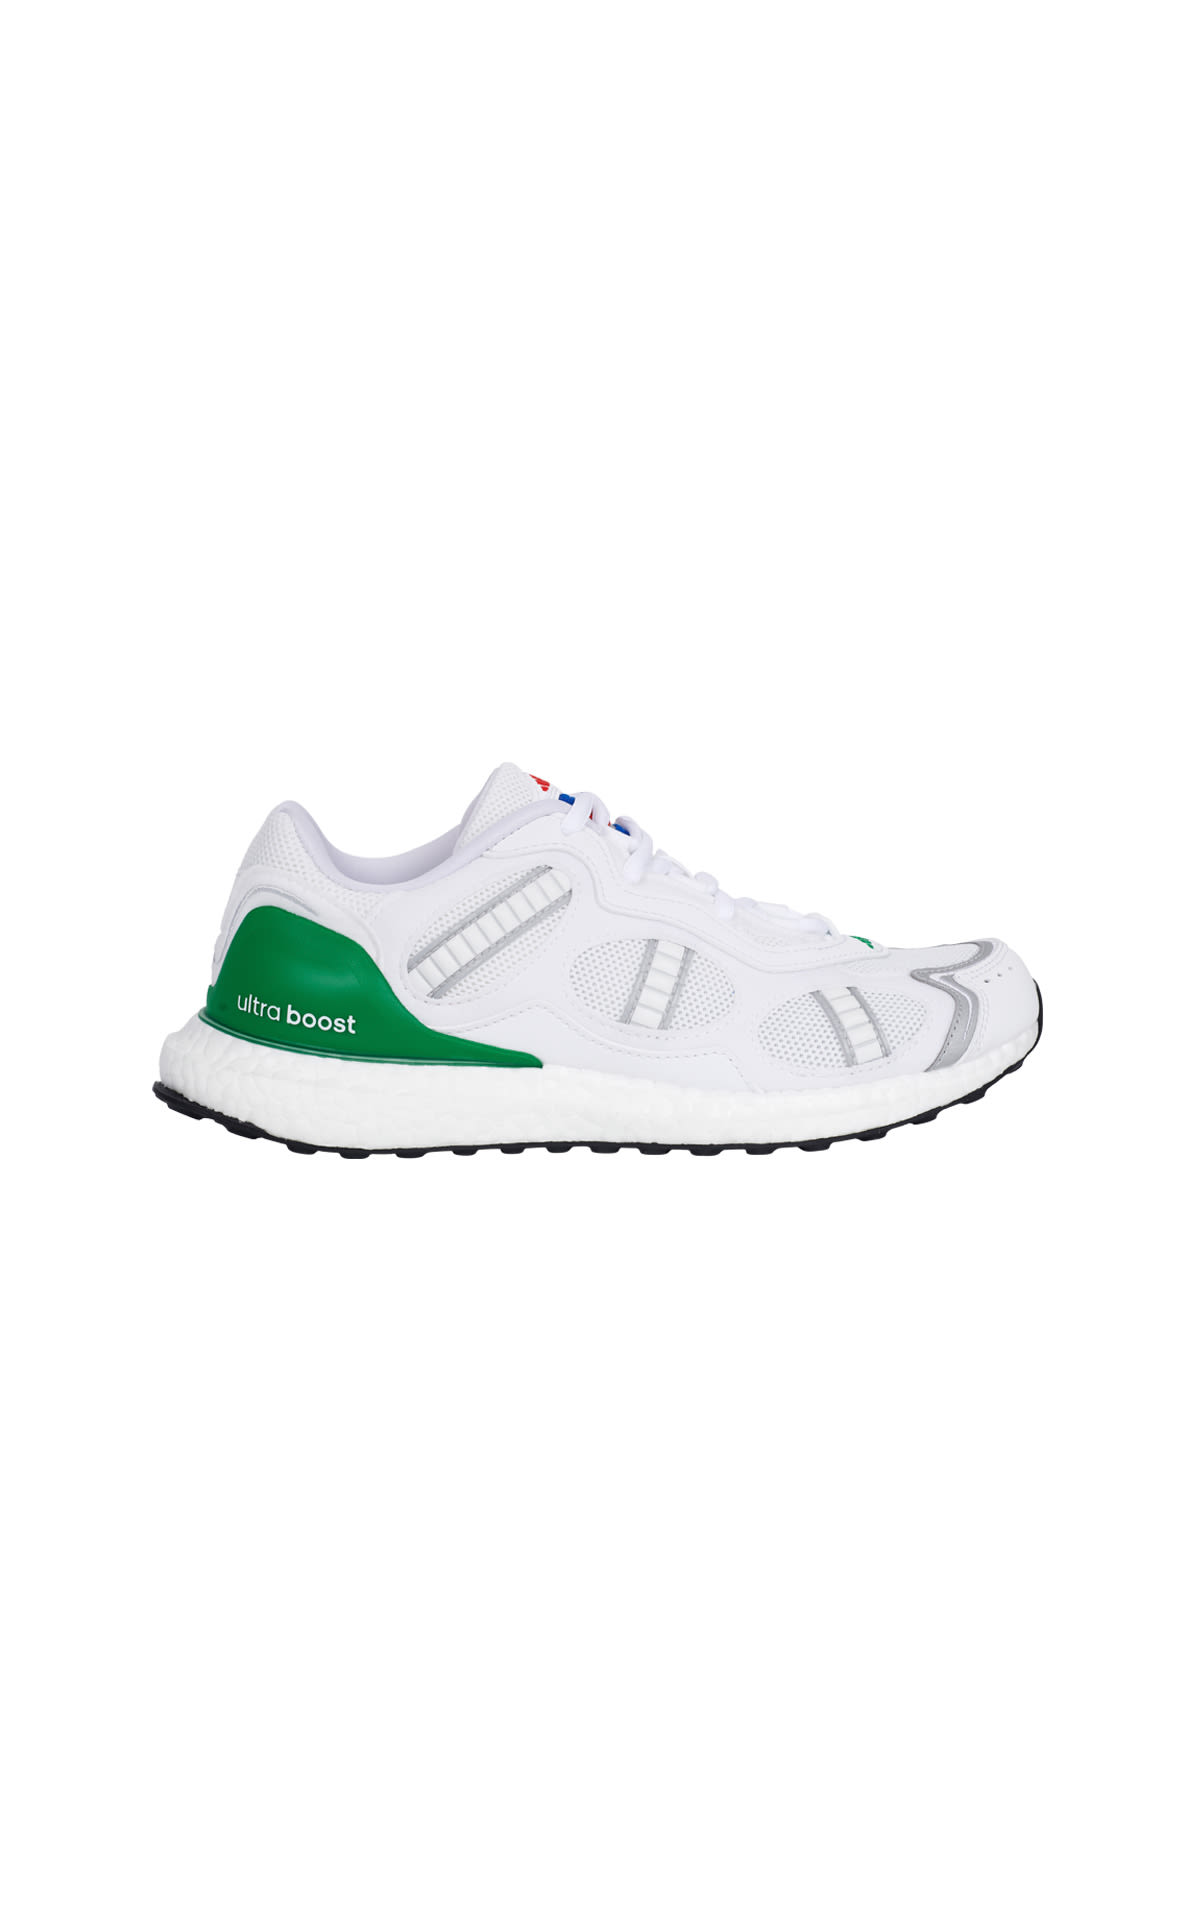 White and green sneaker adidas